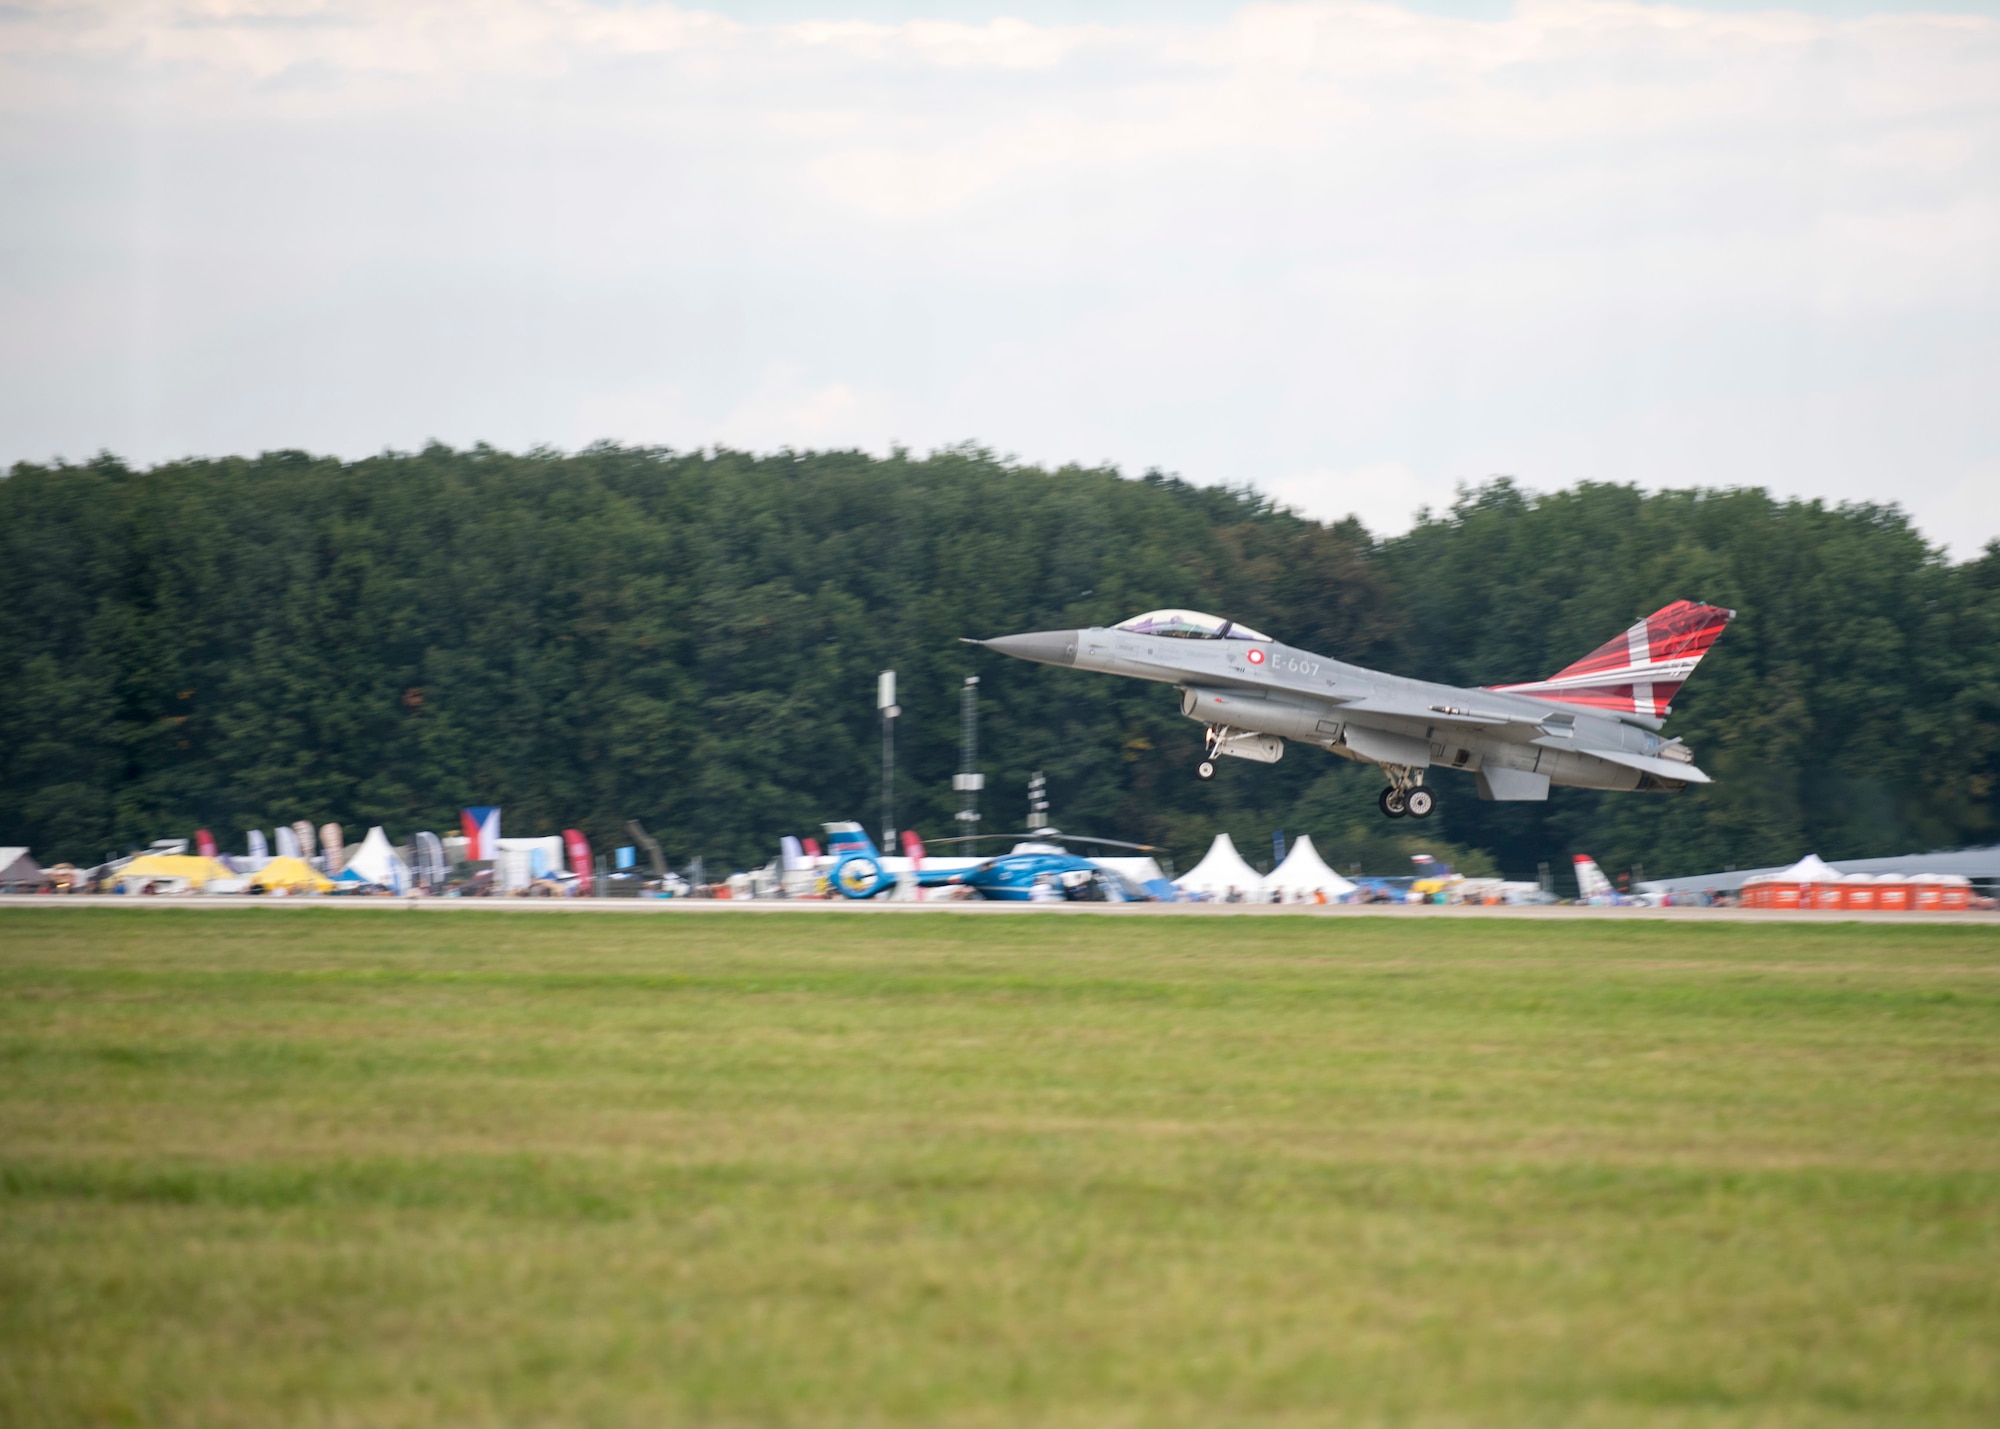 A Royal Danish Air Force F-16C Fighting Falcon lands at Ostrava Air Base, Czech Republic, during NATO Days. NATO Days is a Czech Republic-led air show and exhibition that showcases military ground and aviation capabilities from 19 nations. Participation in NATO Days increases our understanding of European ally and partner capabilities, greatly enhancing our ability to operate together as a team. (U.S. Navy photo by Mass Communication Specialist 2nd Class Robert J. Baldock)